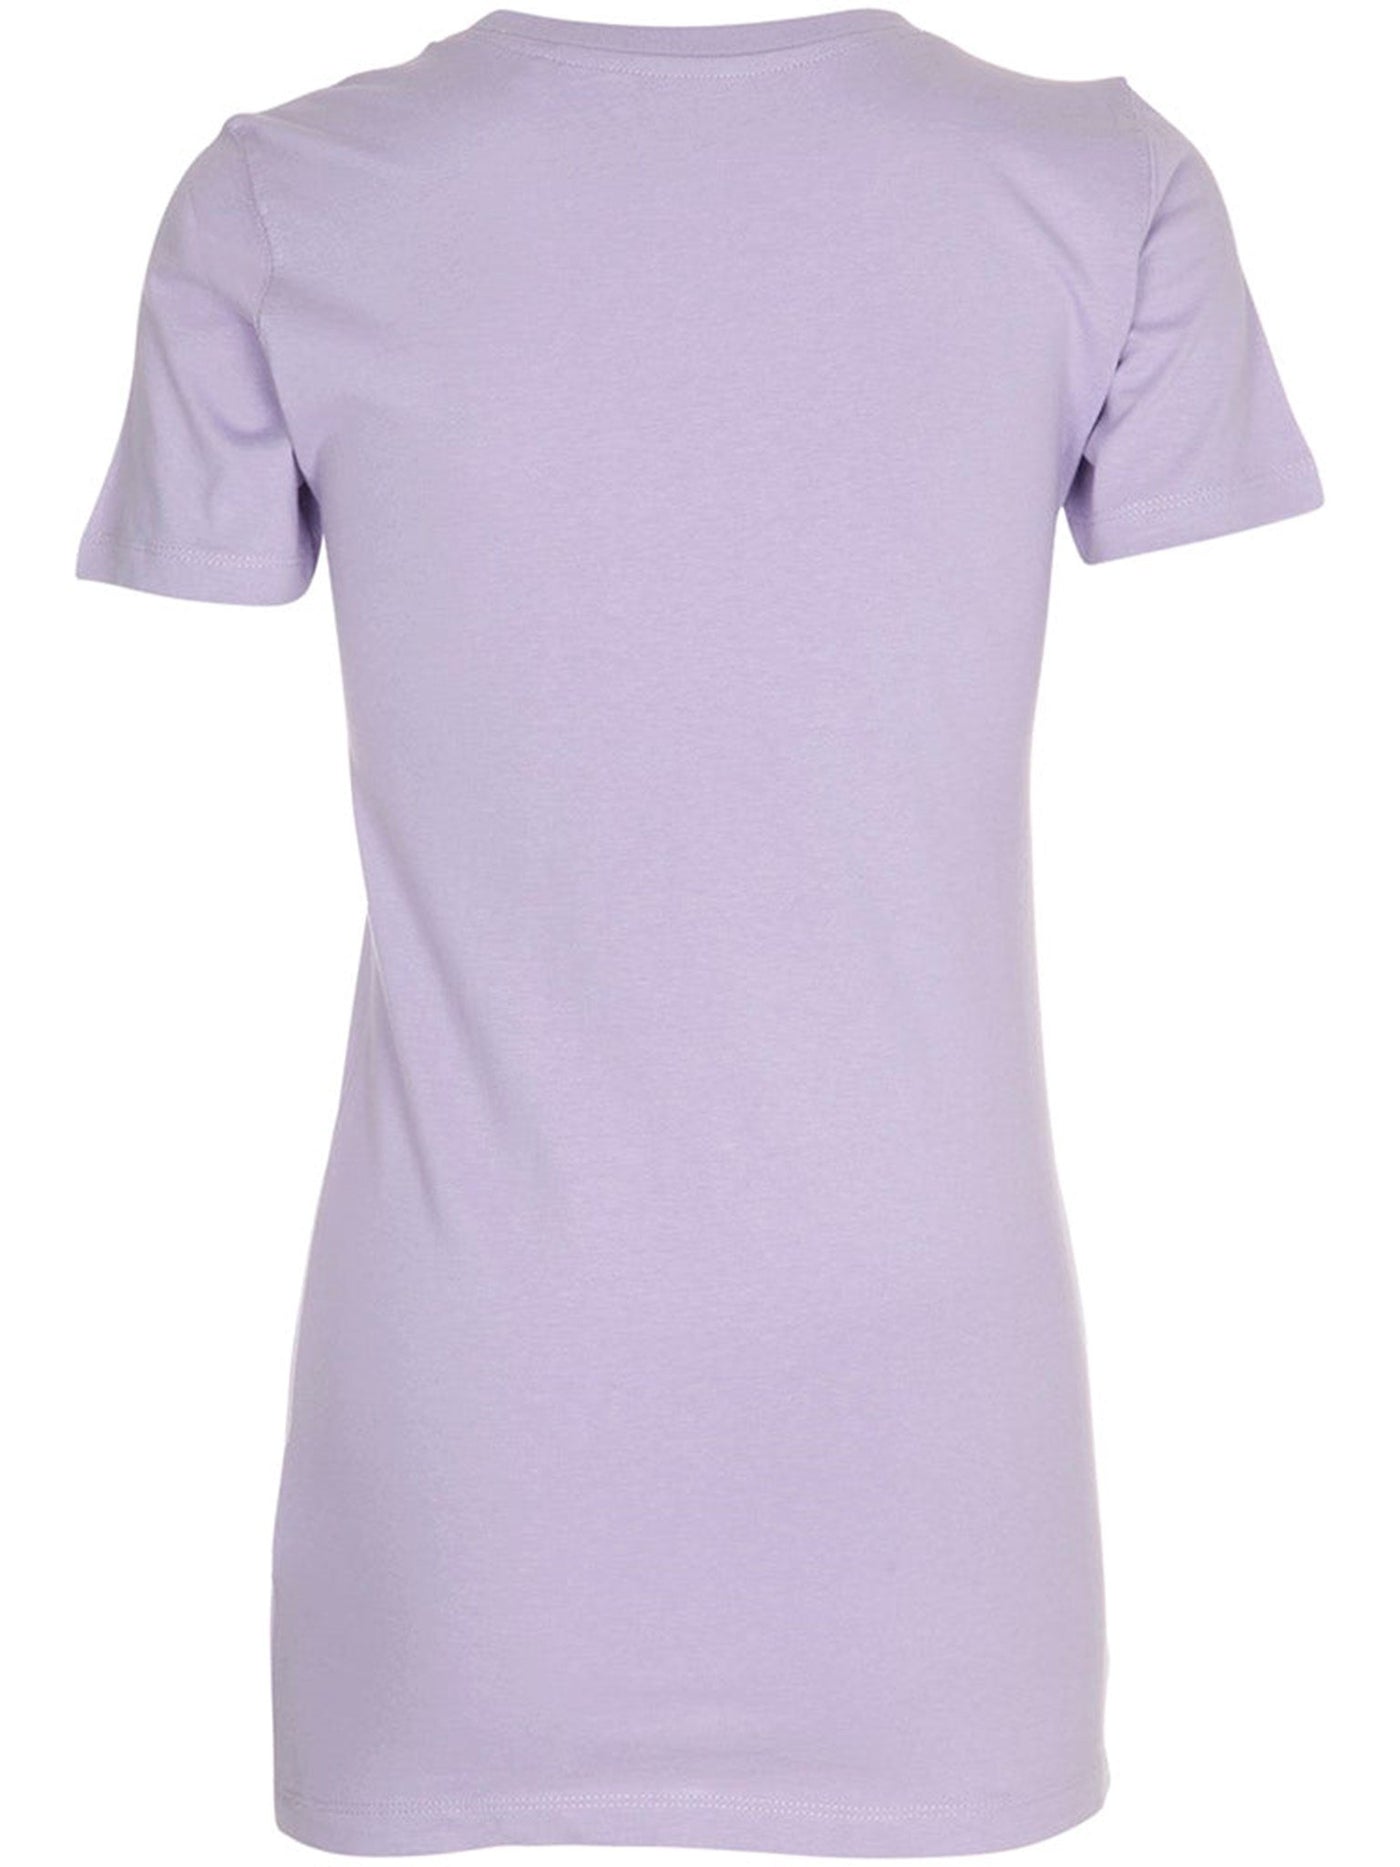 Fitted t-shirt - TeeShoppen - Lilla 6